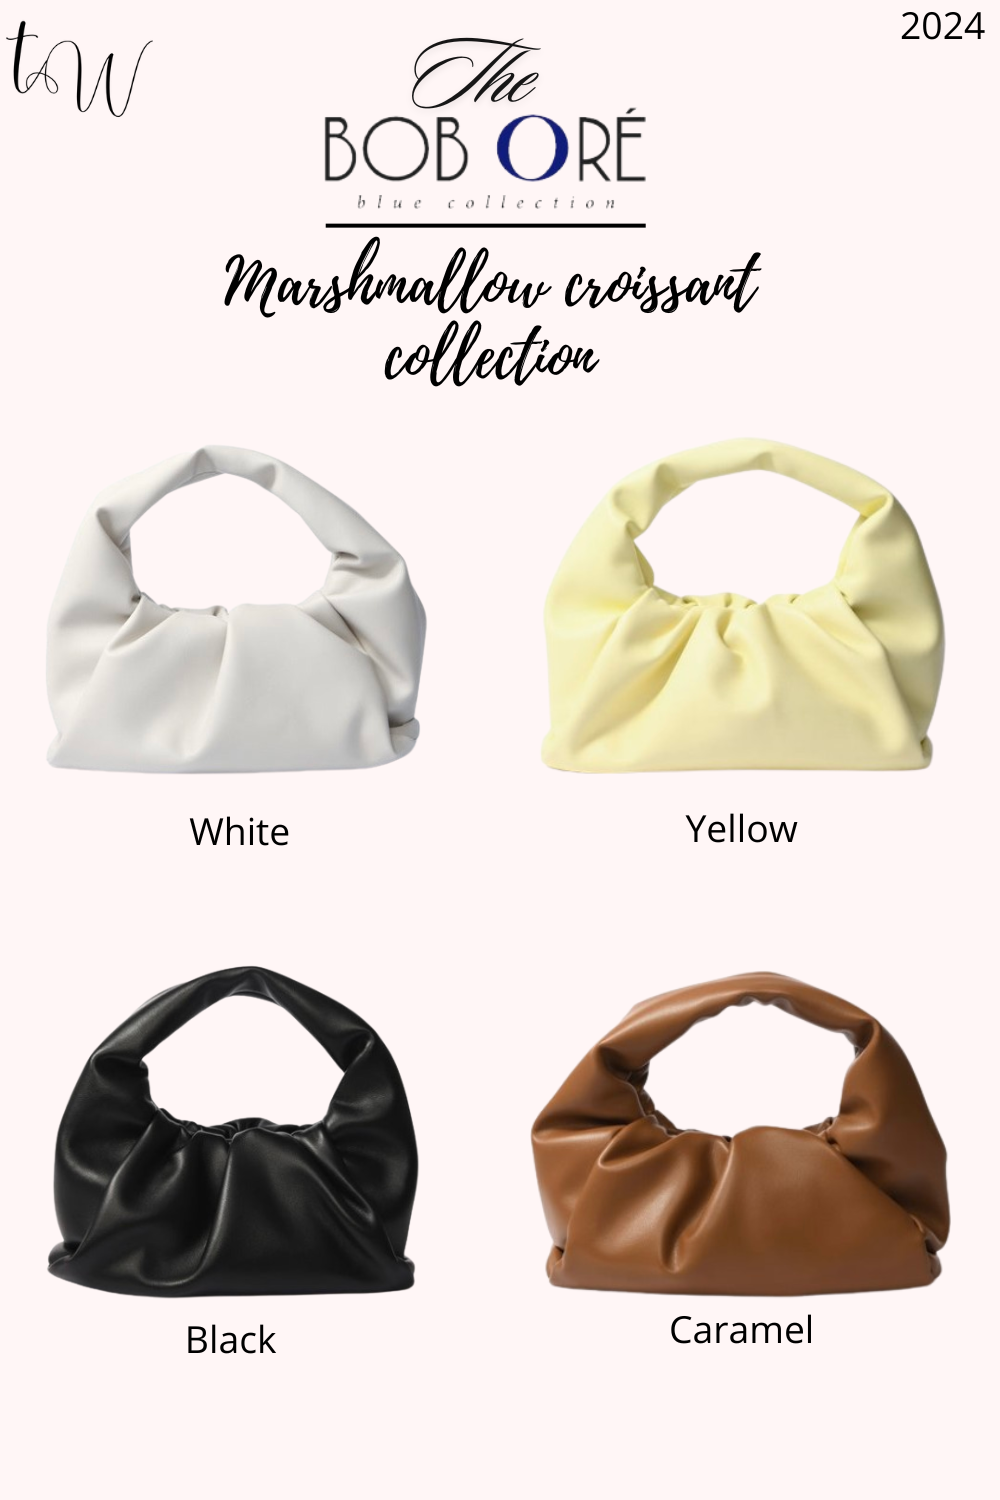 Bob Ore's Bags: Marshmallow Croissant Collection